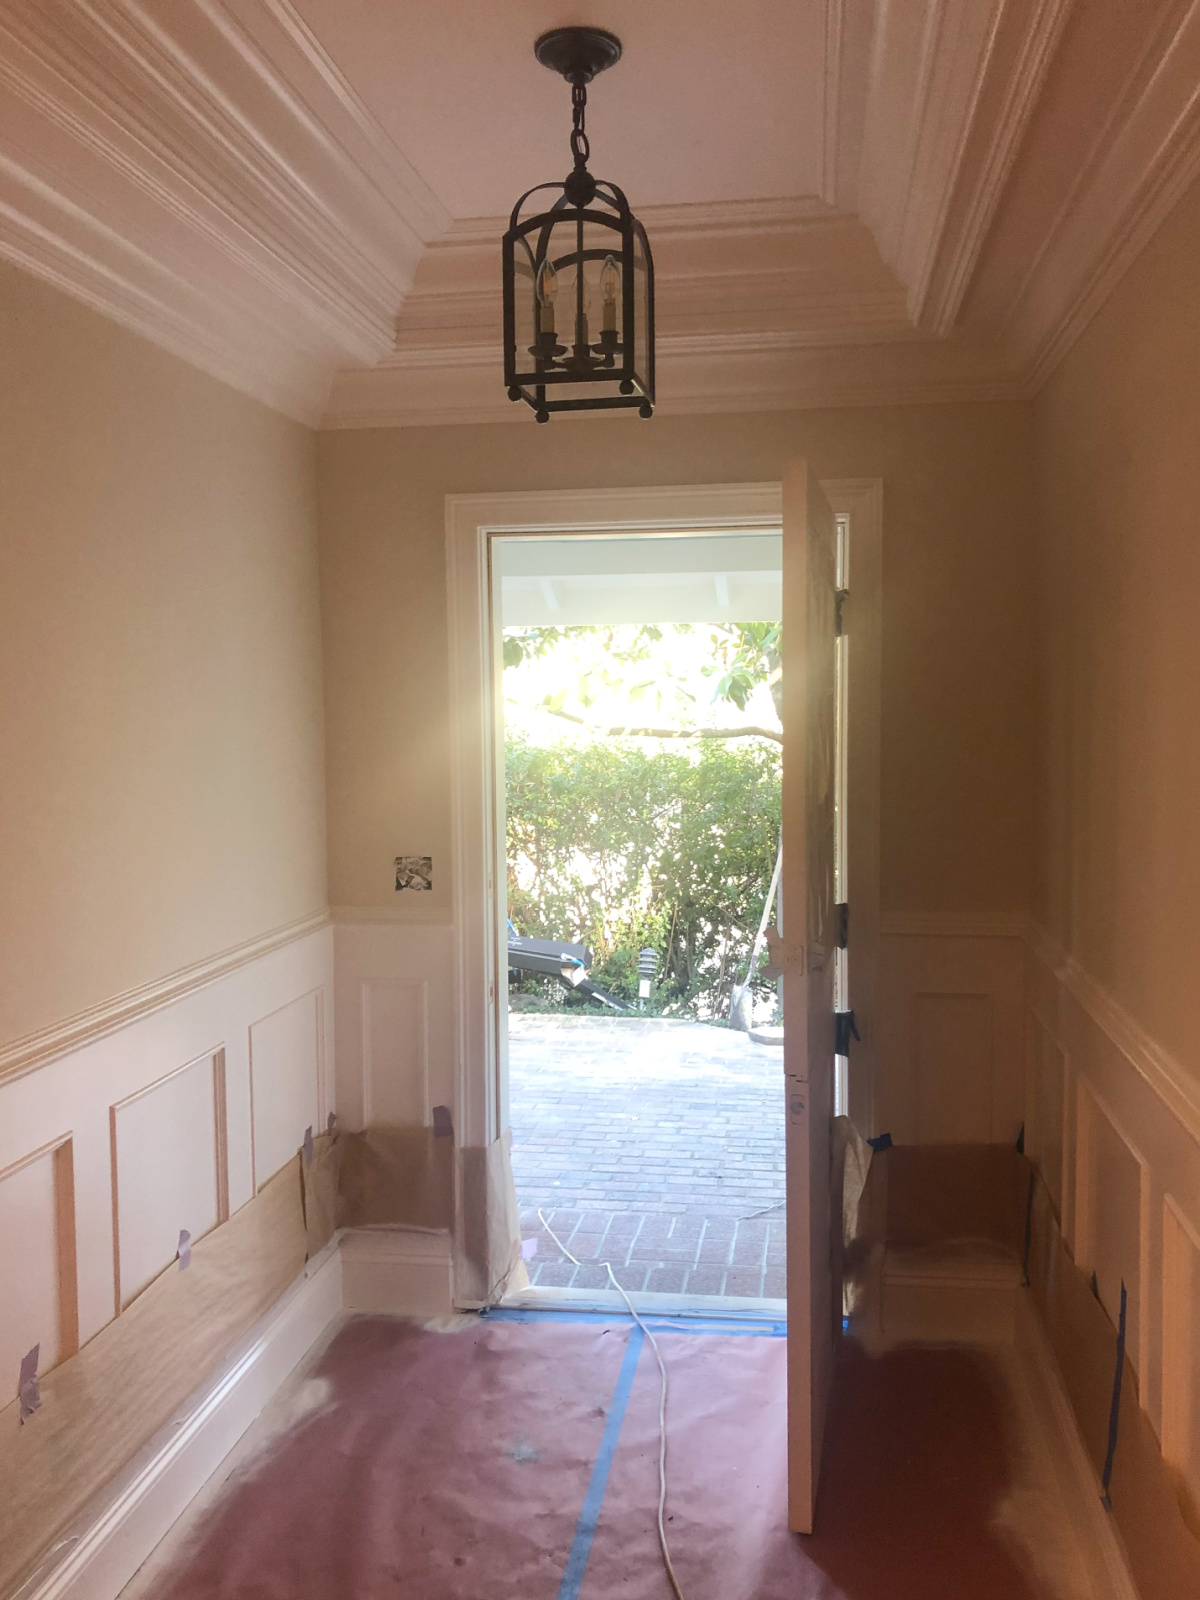 Small foyer in midst of renovation.